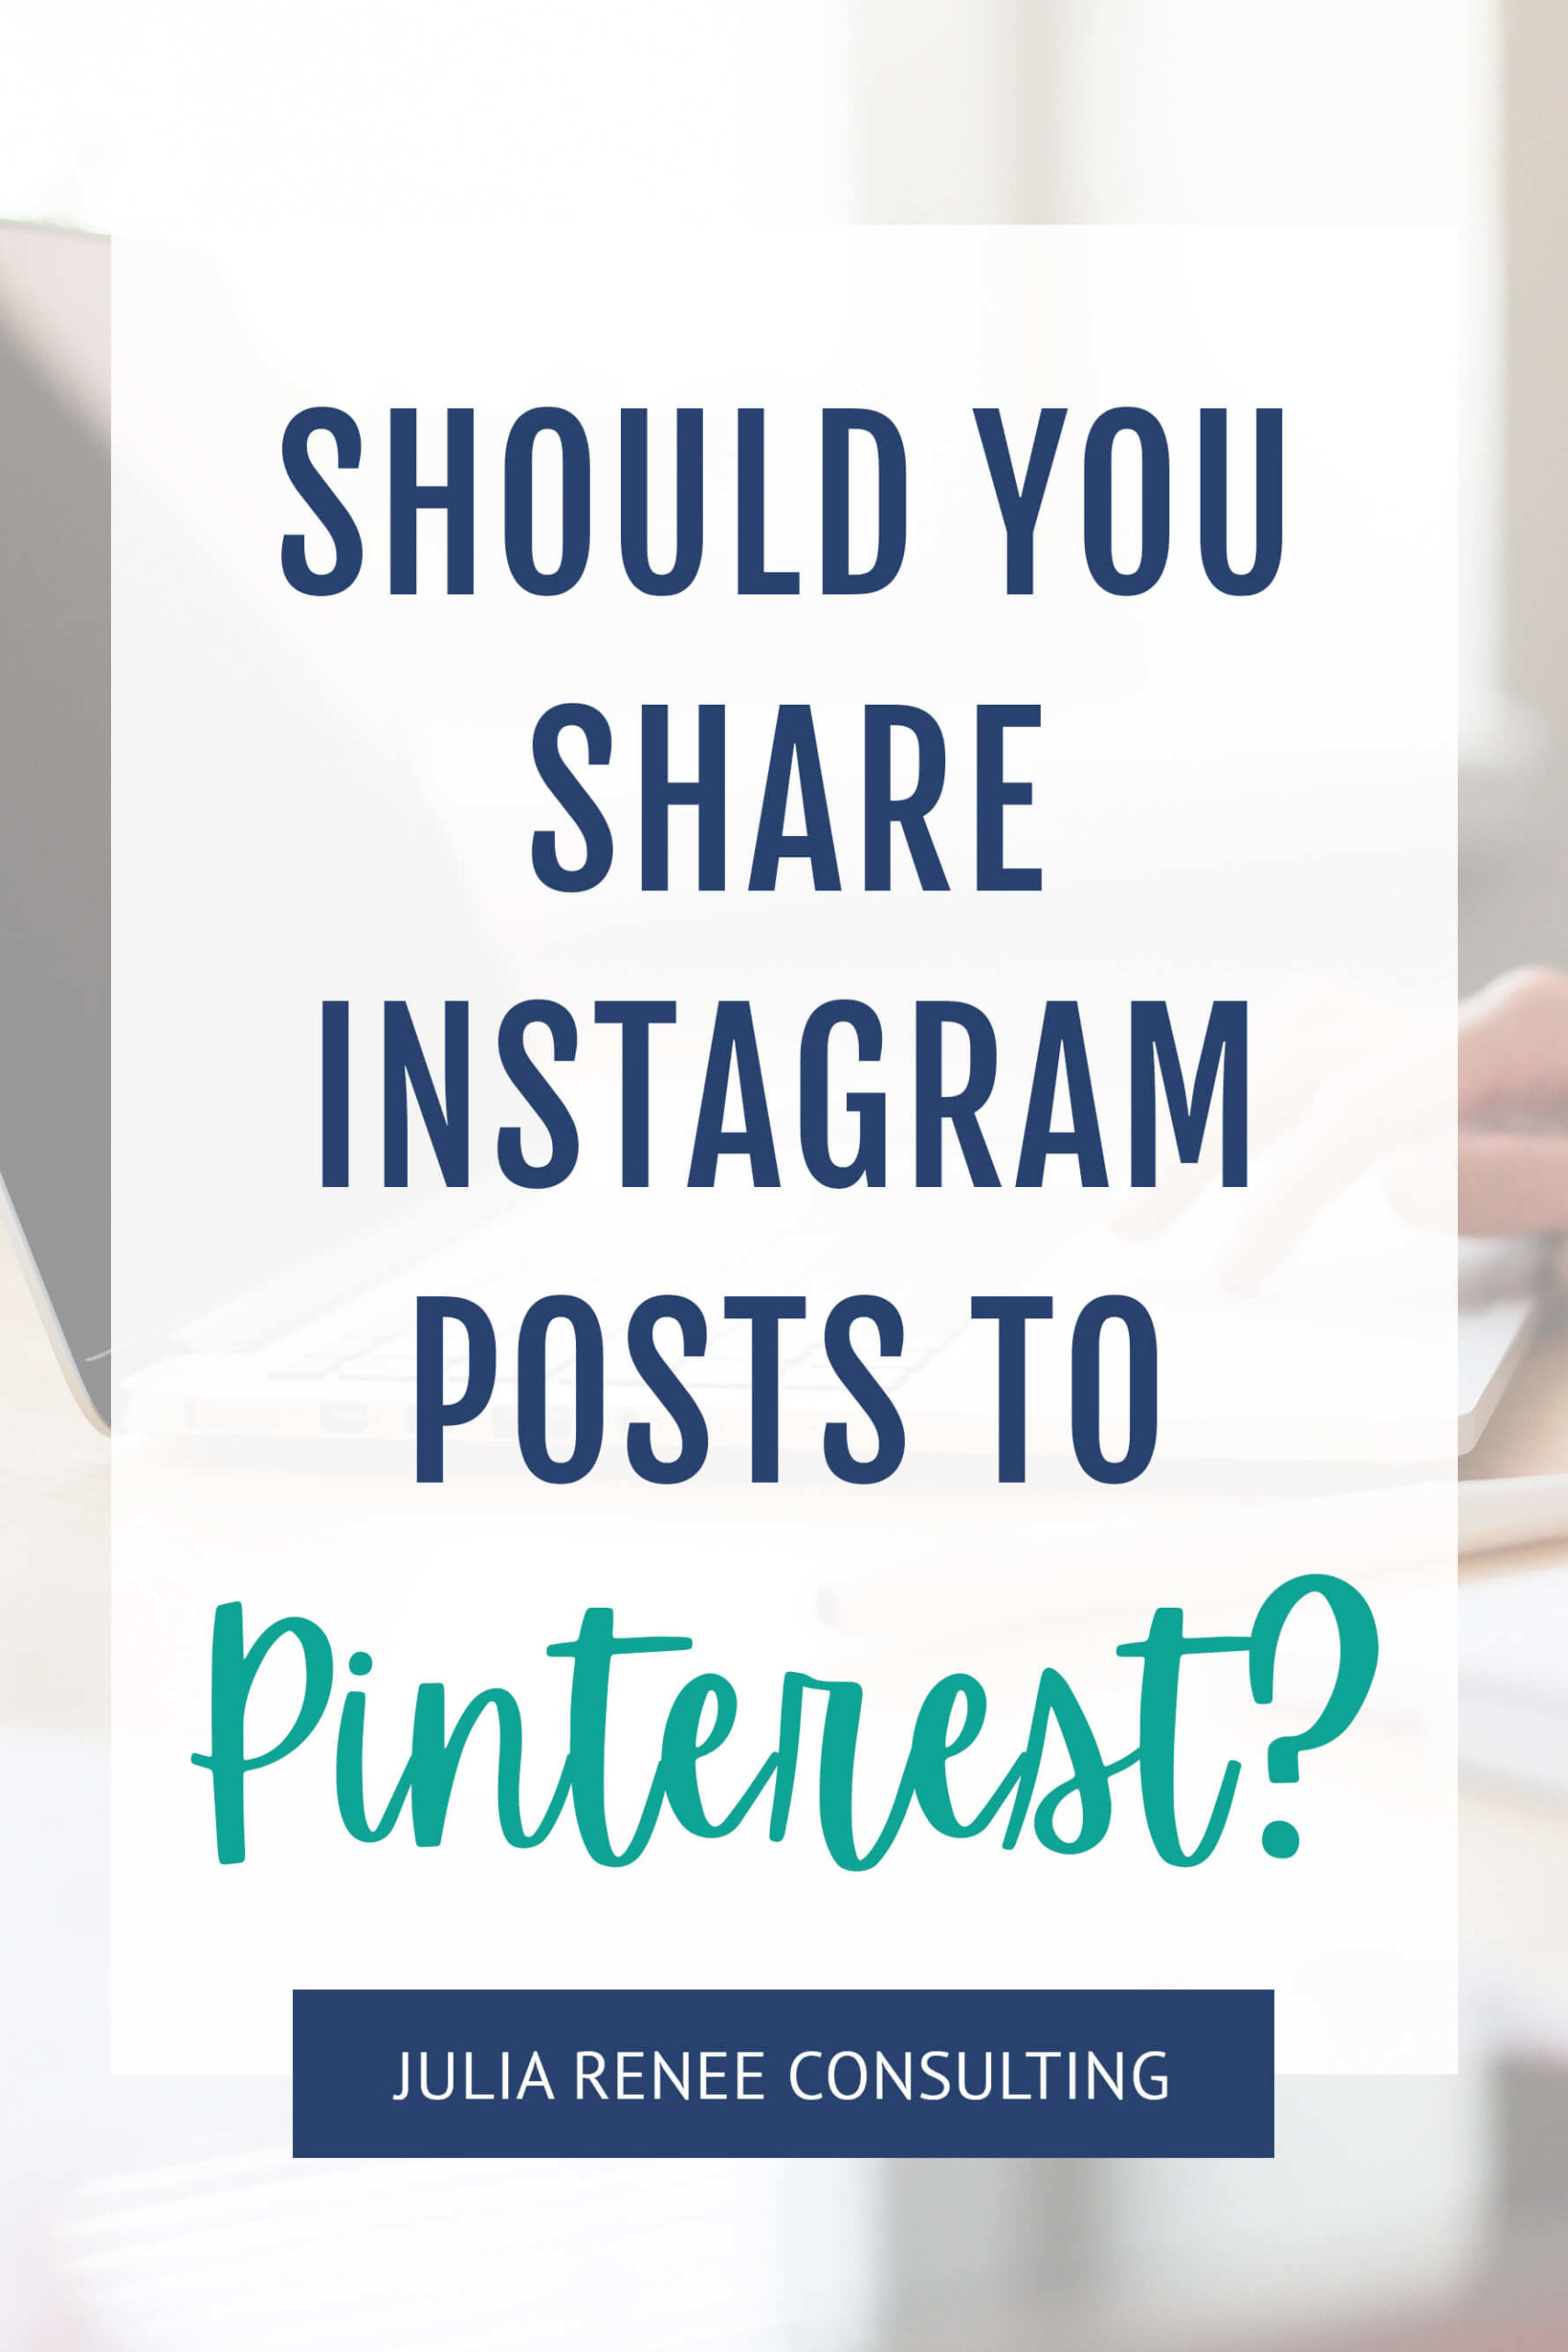 Should You Share Instagram Posts to Pinterest?